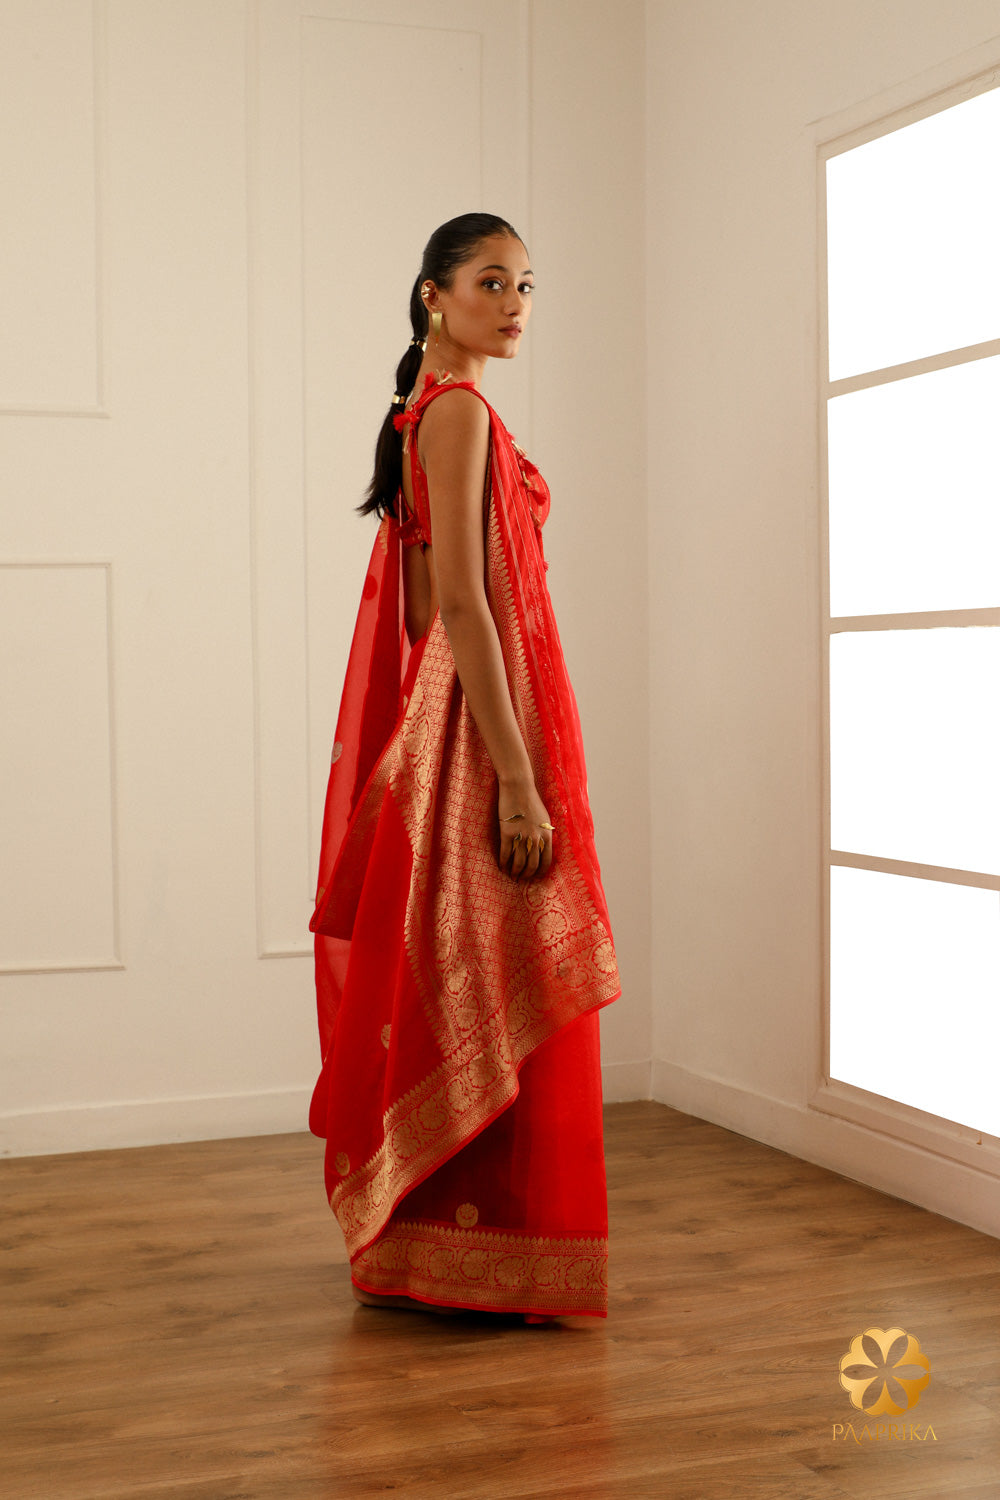 A side view of the saree showcasing its striking red hue and delicate Kora Organza fabric.